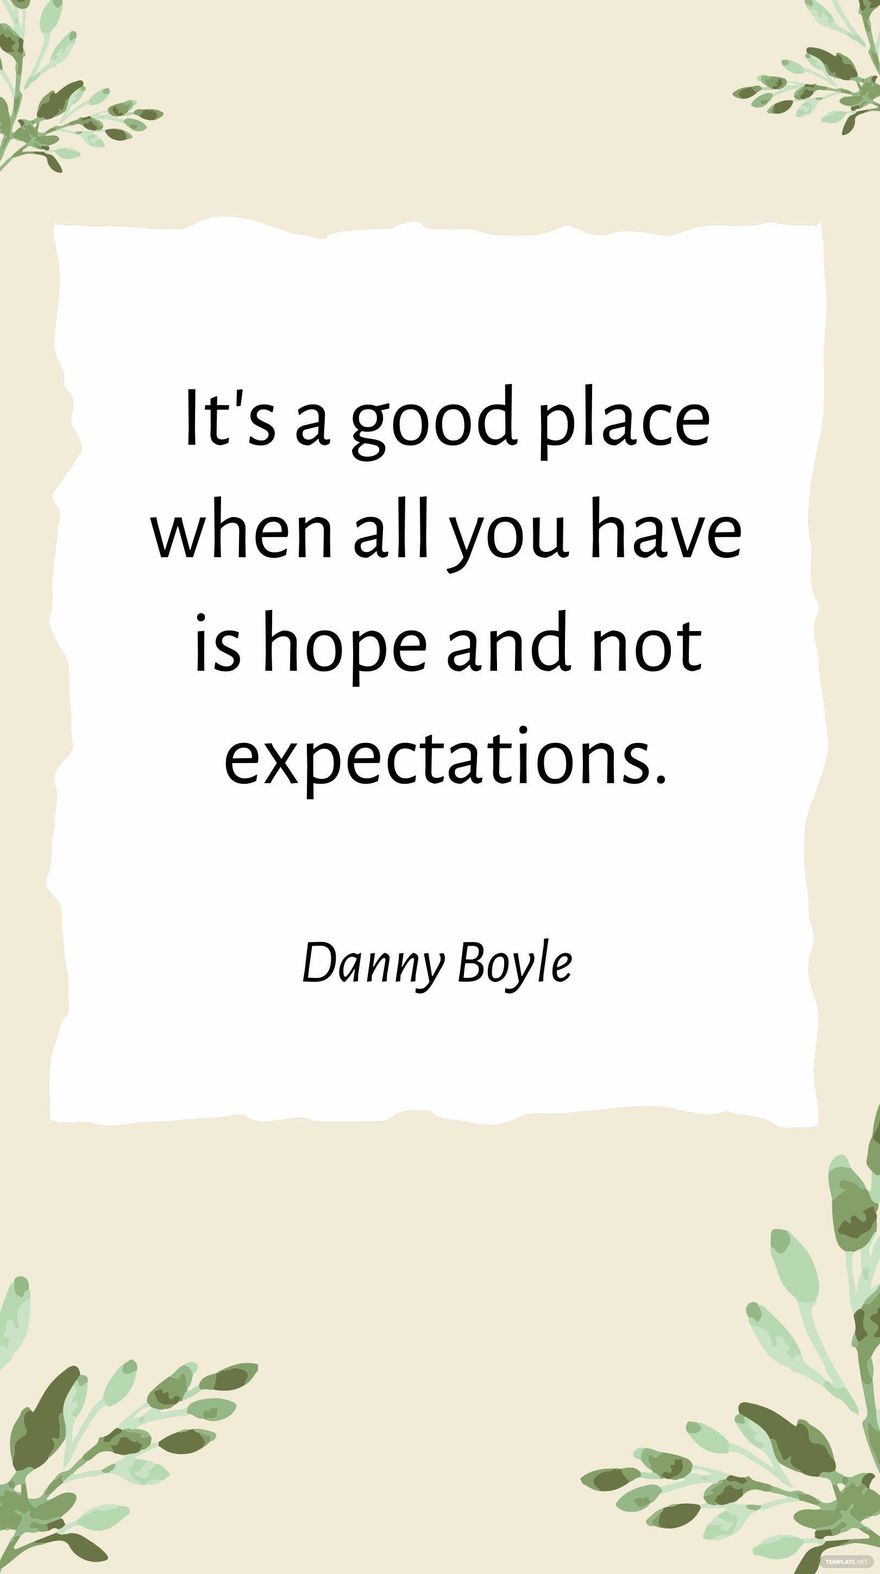 Danny Boyle - It's a good place when all you have is hope and not expectations. in JPG